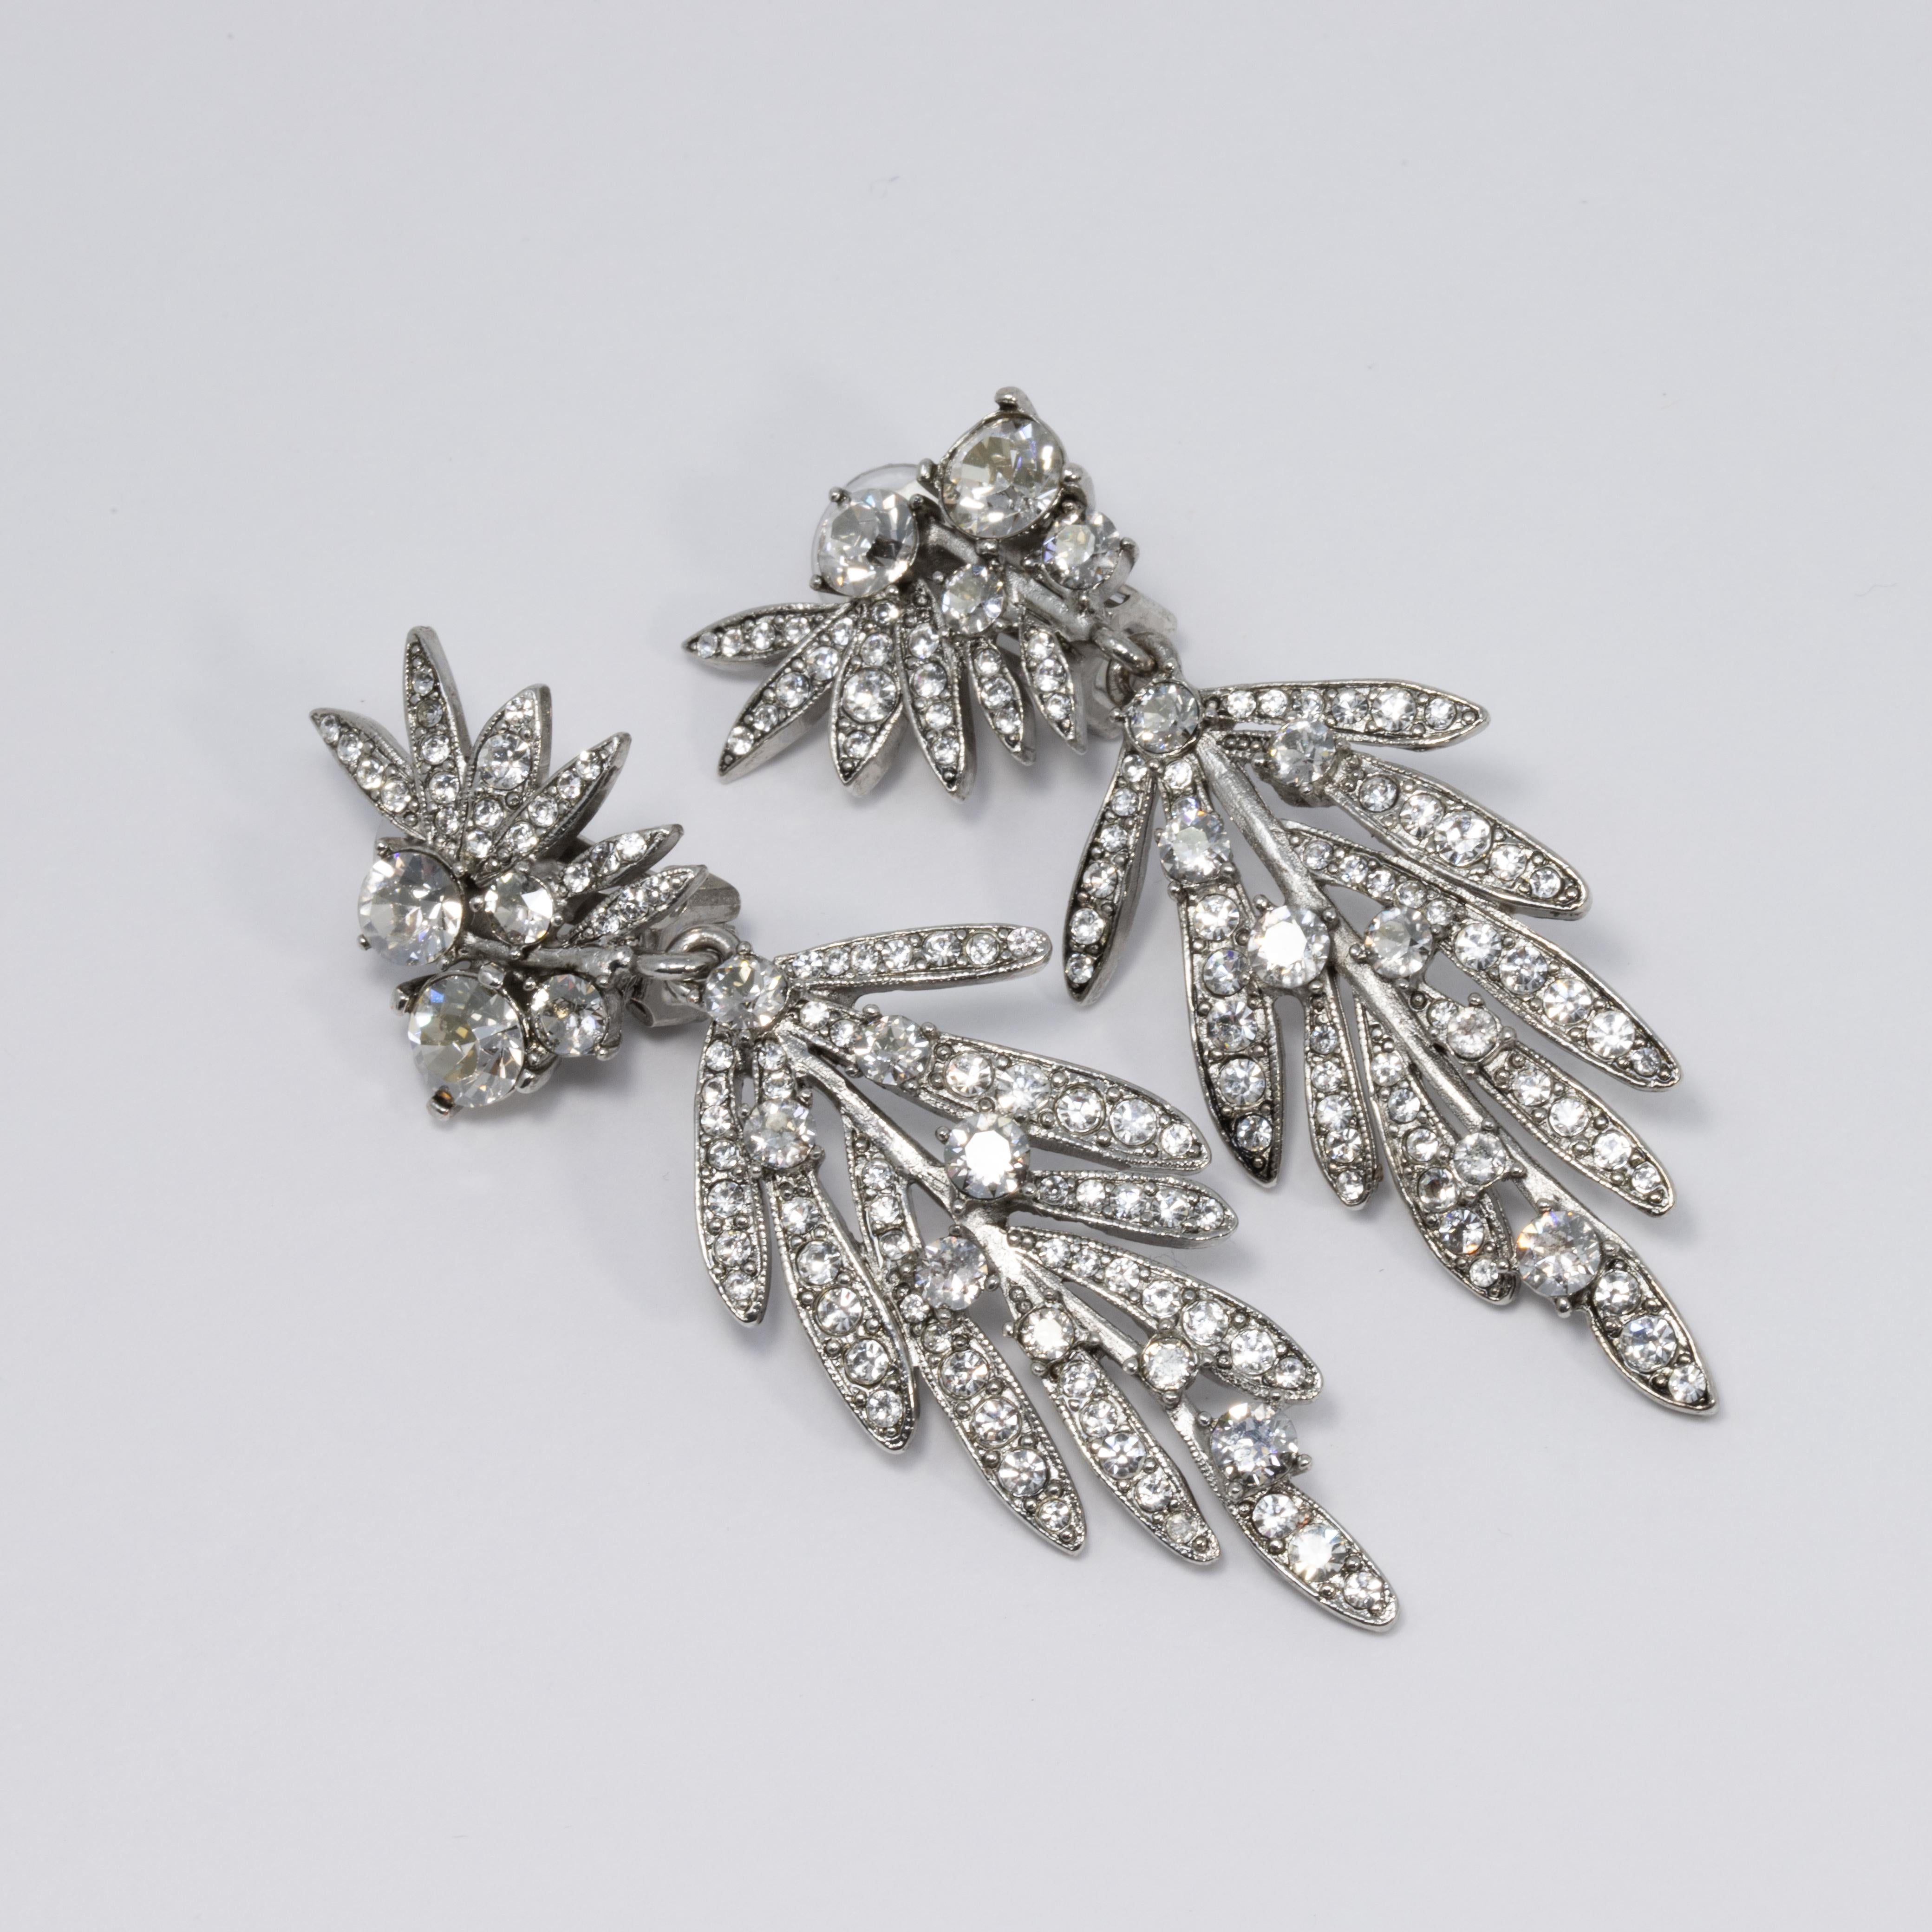 An exquisite pair of earrings by Oscar de la Renta! Each earring features dangling silvertone tropical leaves accented with clear Swarovski crystals. 

Hallmarks: Oscar de la Renta, Made in USA